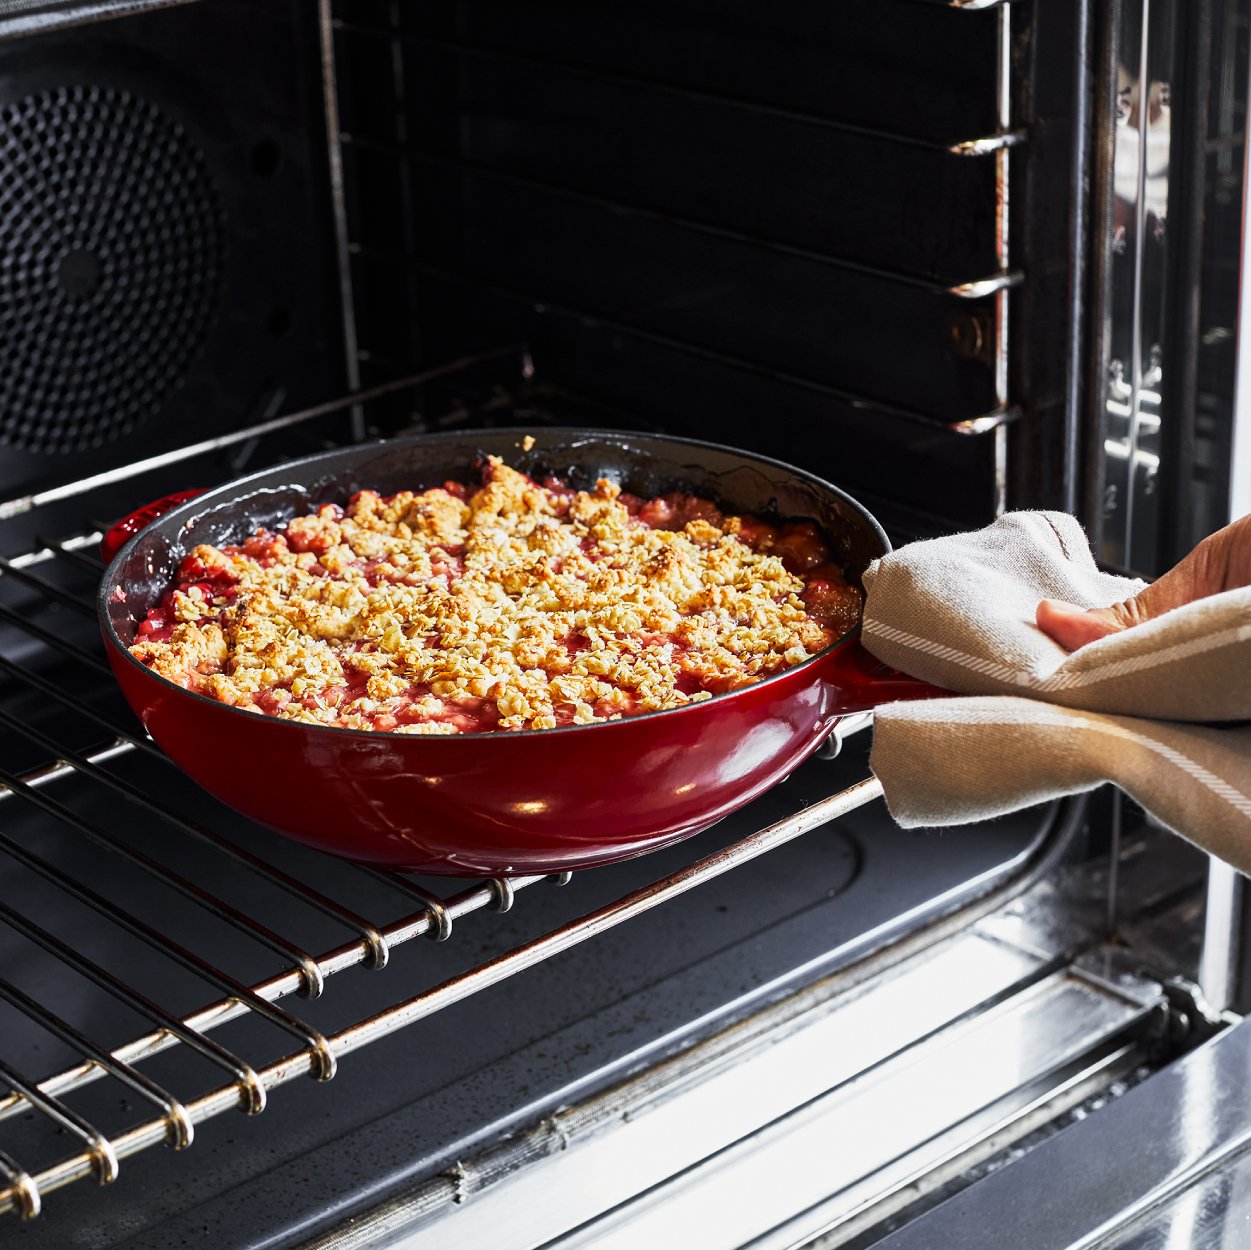 https://www.zwilling.com/on/demandware.static/-/Sites-zwilling-us-Library/default/dw1d7213b4/images/product-content/masonry-content/staub/cookware/daily-pan/daily_Mason_Comp_600-600_DailyPanMasonry_3.jpg